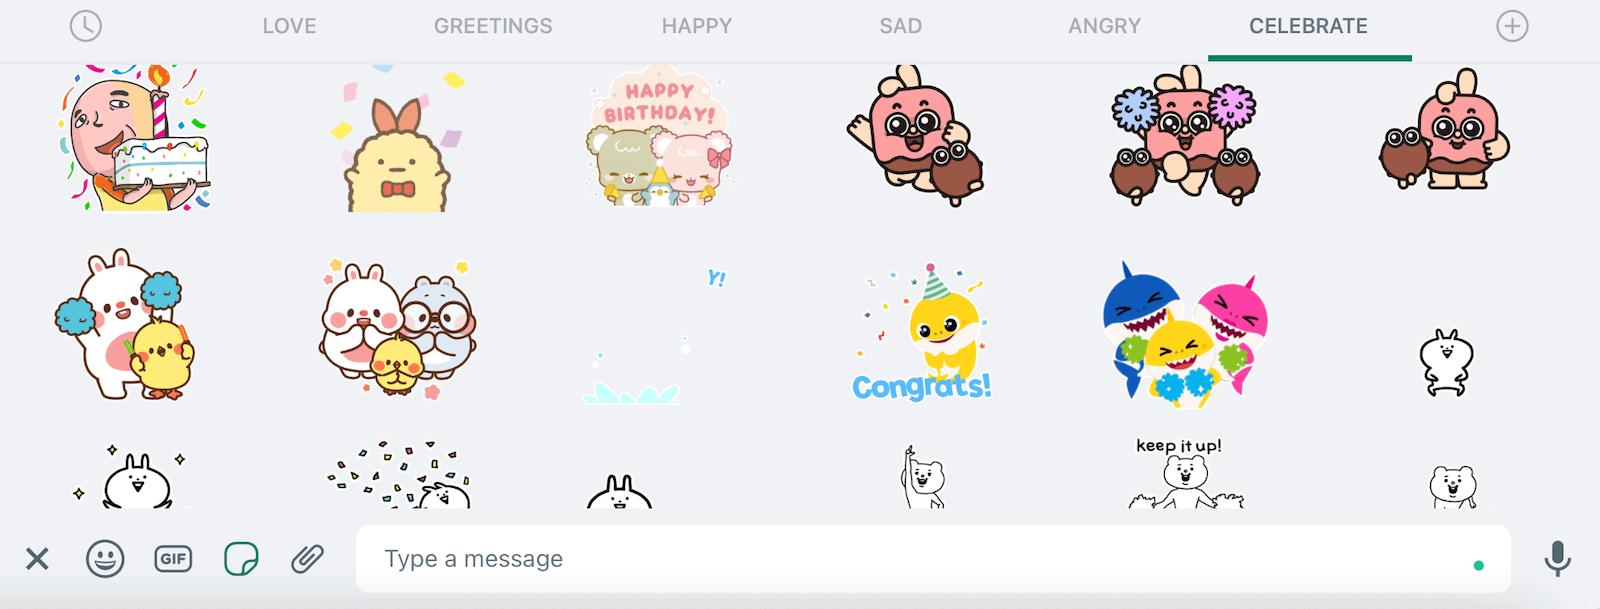 How To Create Your Own Personal Stickers On WhatsApp (Android) - TechWiser